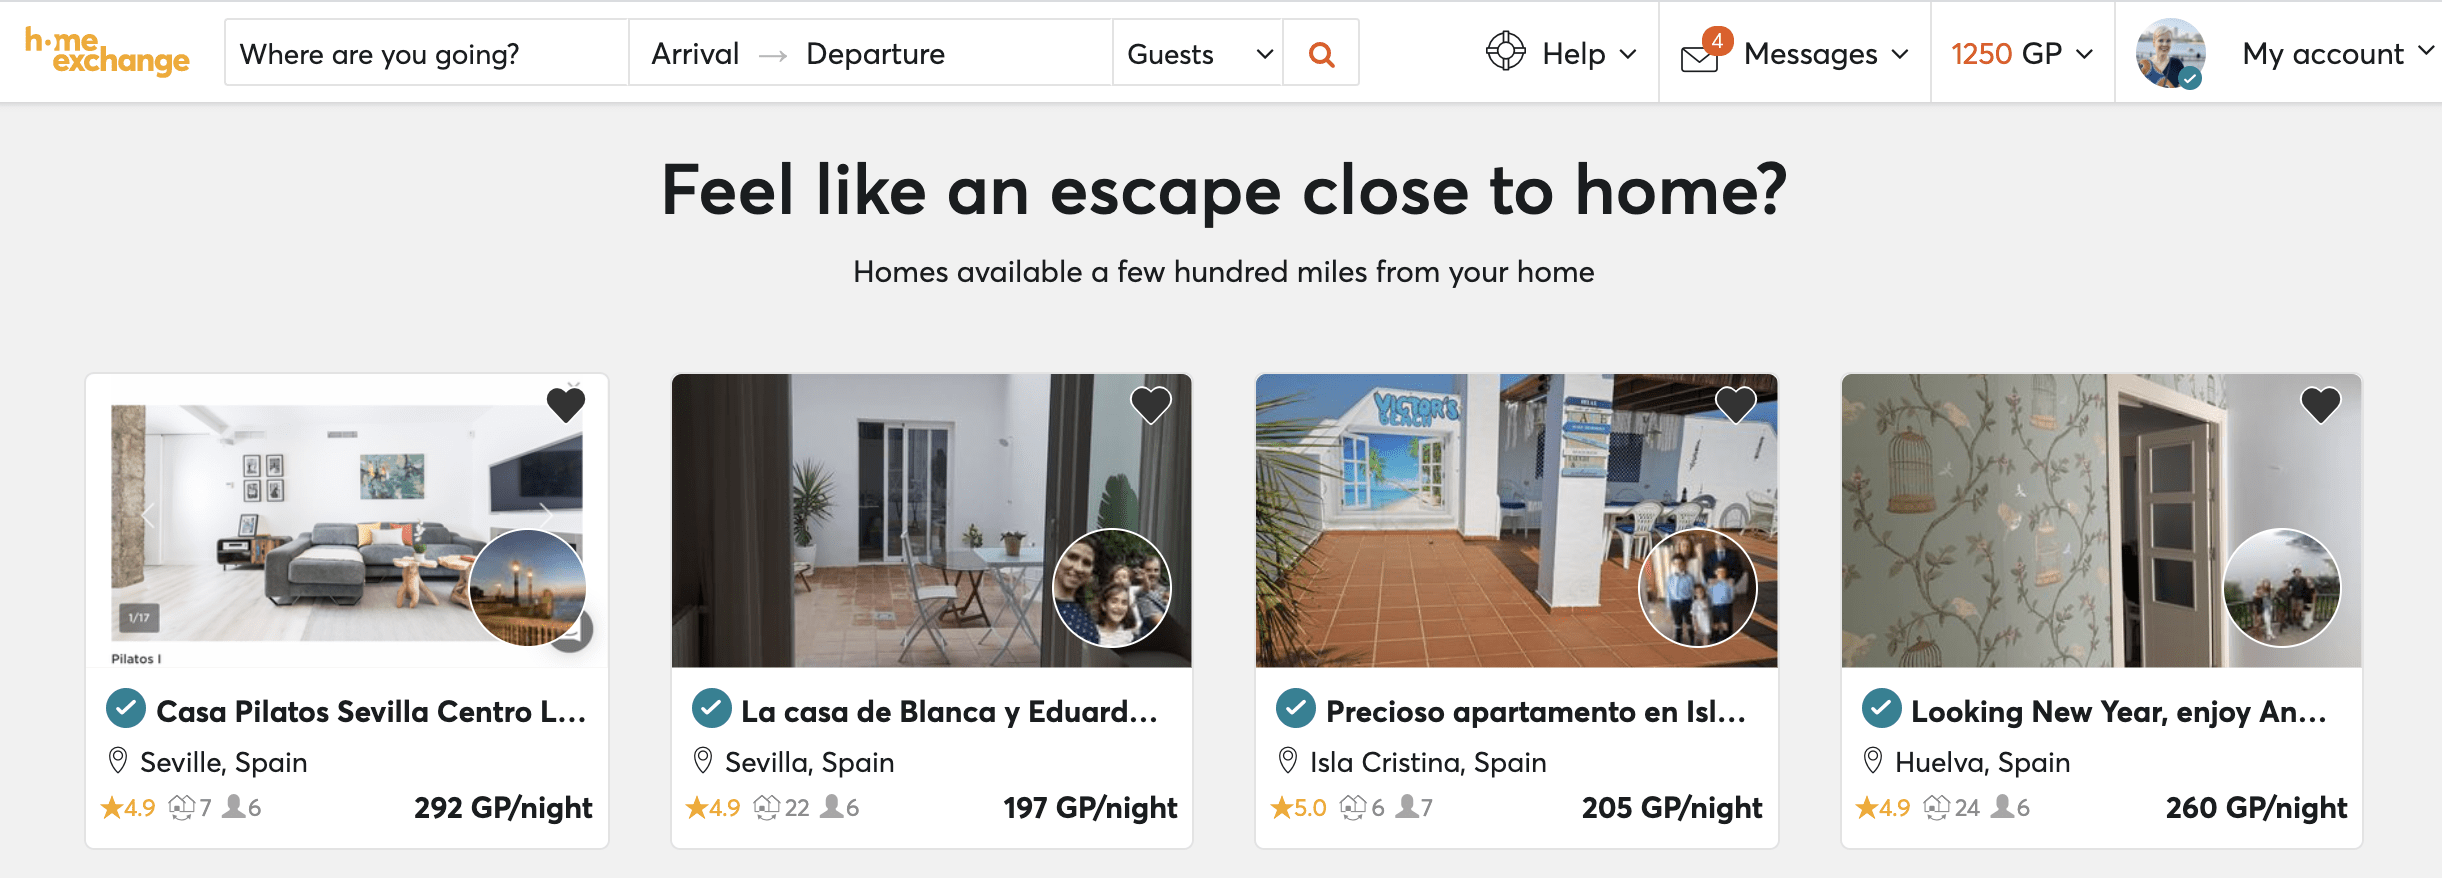 HomeExchange can help you exchange your homes | 40plusstyle.com